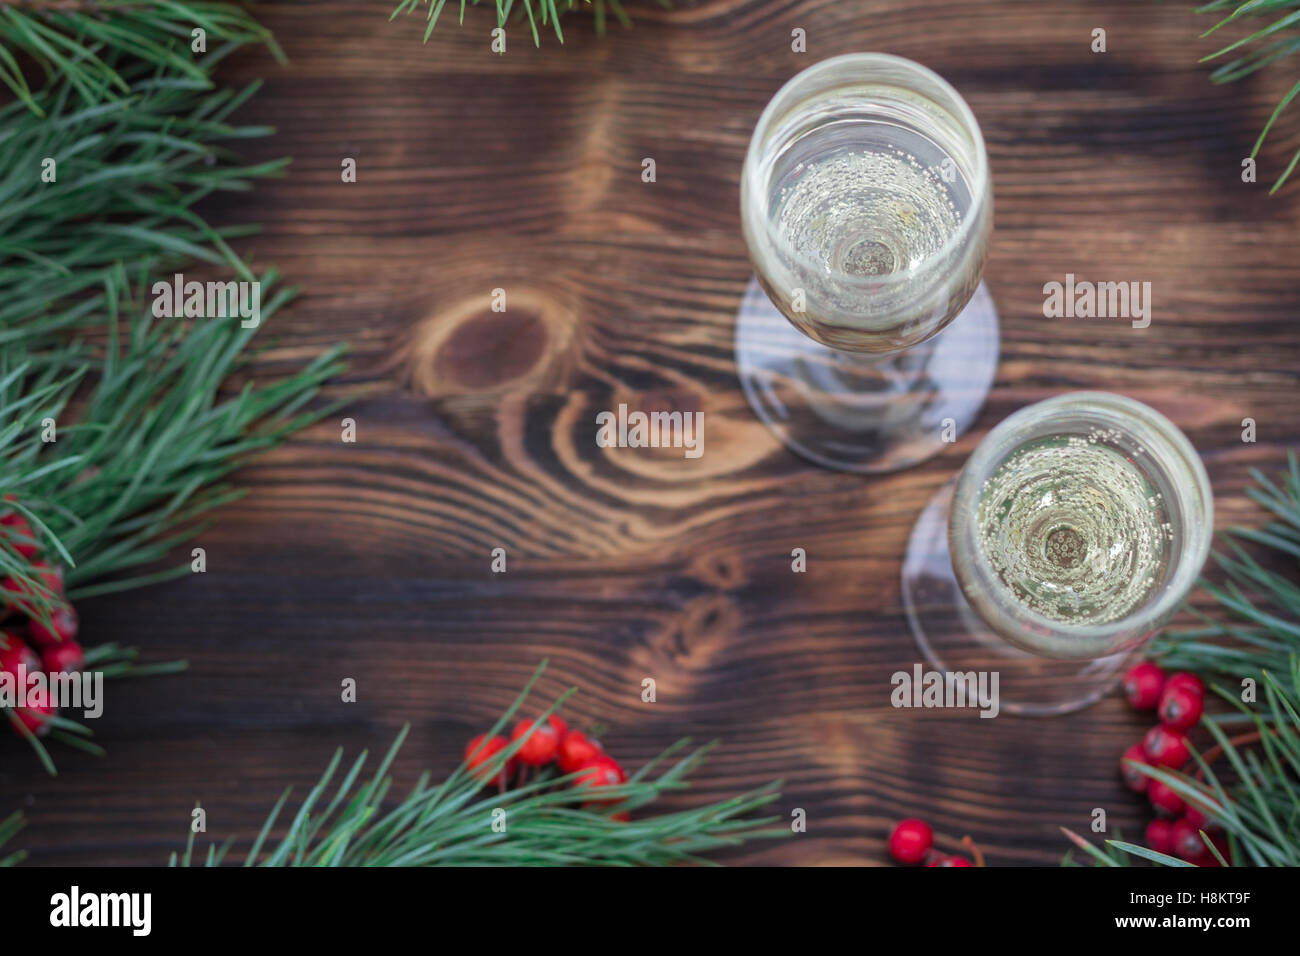 Christmas and New Year seasonal composition with pine tree branches, two glasses of champaign and red rowan berries Stock Photo